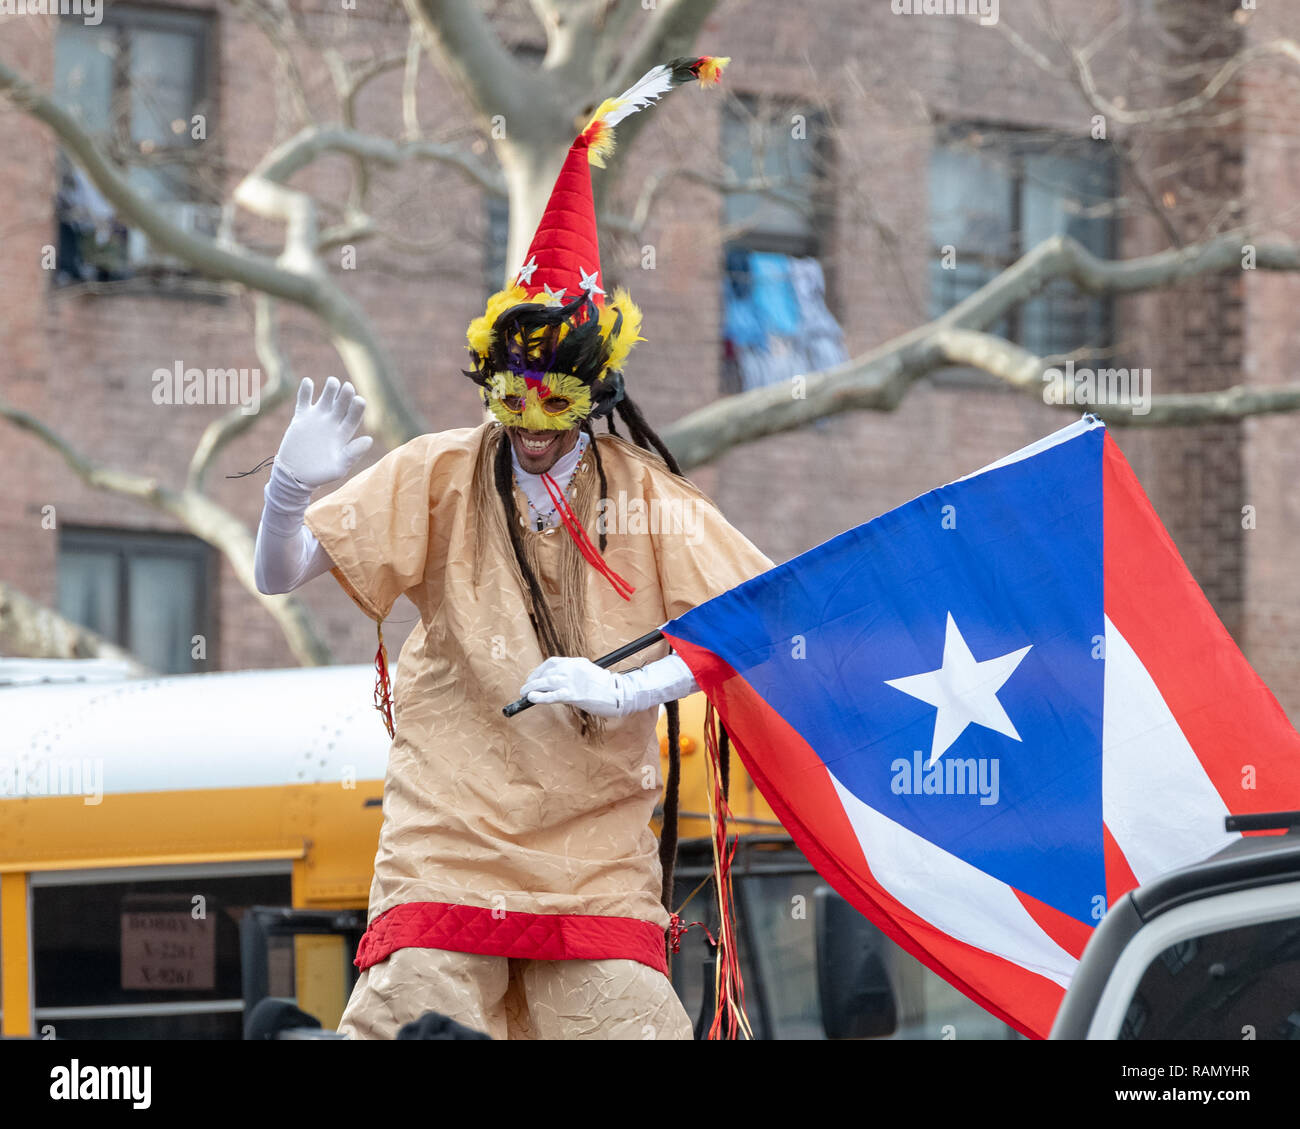 New York, USA. 4th Jan 2019. A performer on stilts waves a flag of Puerto Rico as he greets the public during the 42nd Annual Three Kings Day Parade El Barrio (East Harlem, New York city), Organized by El Museo del Barrio, the event celebrates the popular belief that three wise men visited Jesus. Credit: Enrique Shore/Alamy Live News Stock Photo